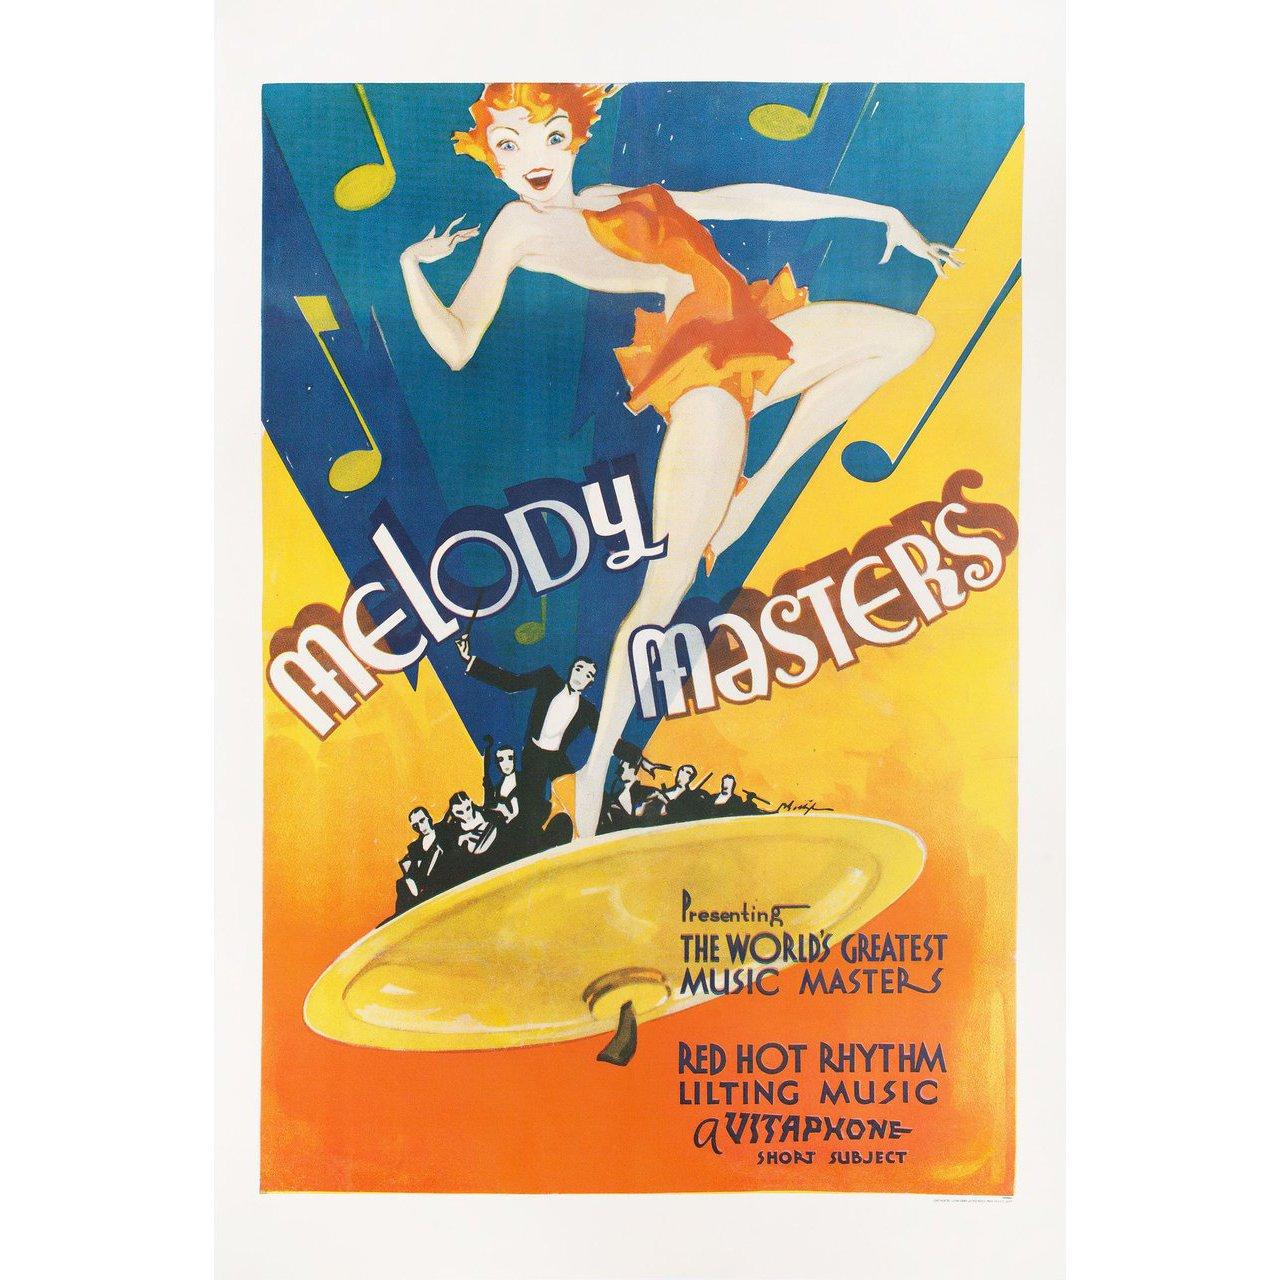 Original 1933 U.S. one sheet poster for the film Melody Masters. Fine condition, linen-backed. This poster has been professionally linen-backed. Please note: the size is stated in inches and the actual size can vary by an inch or more.
 